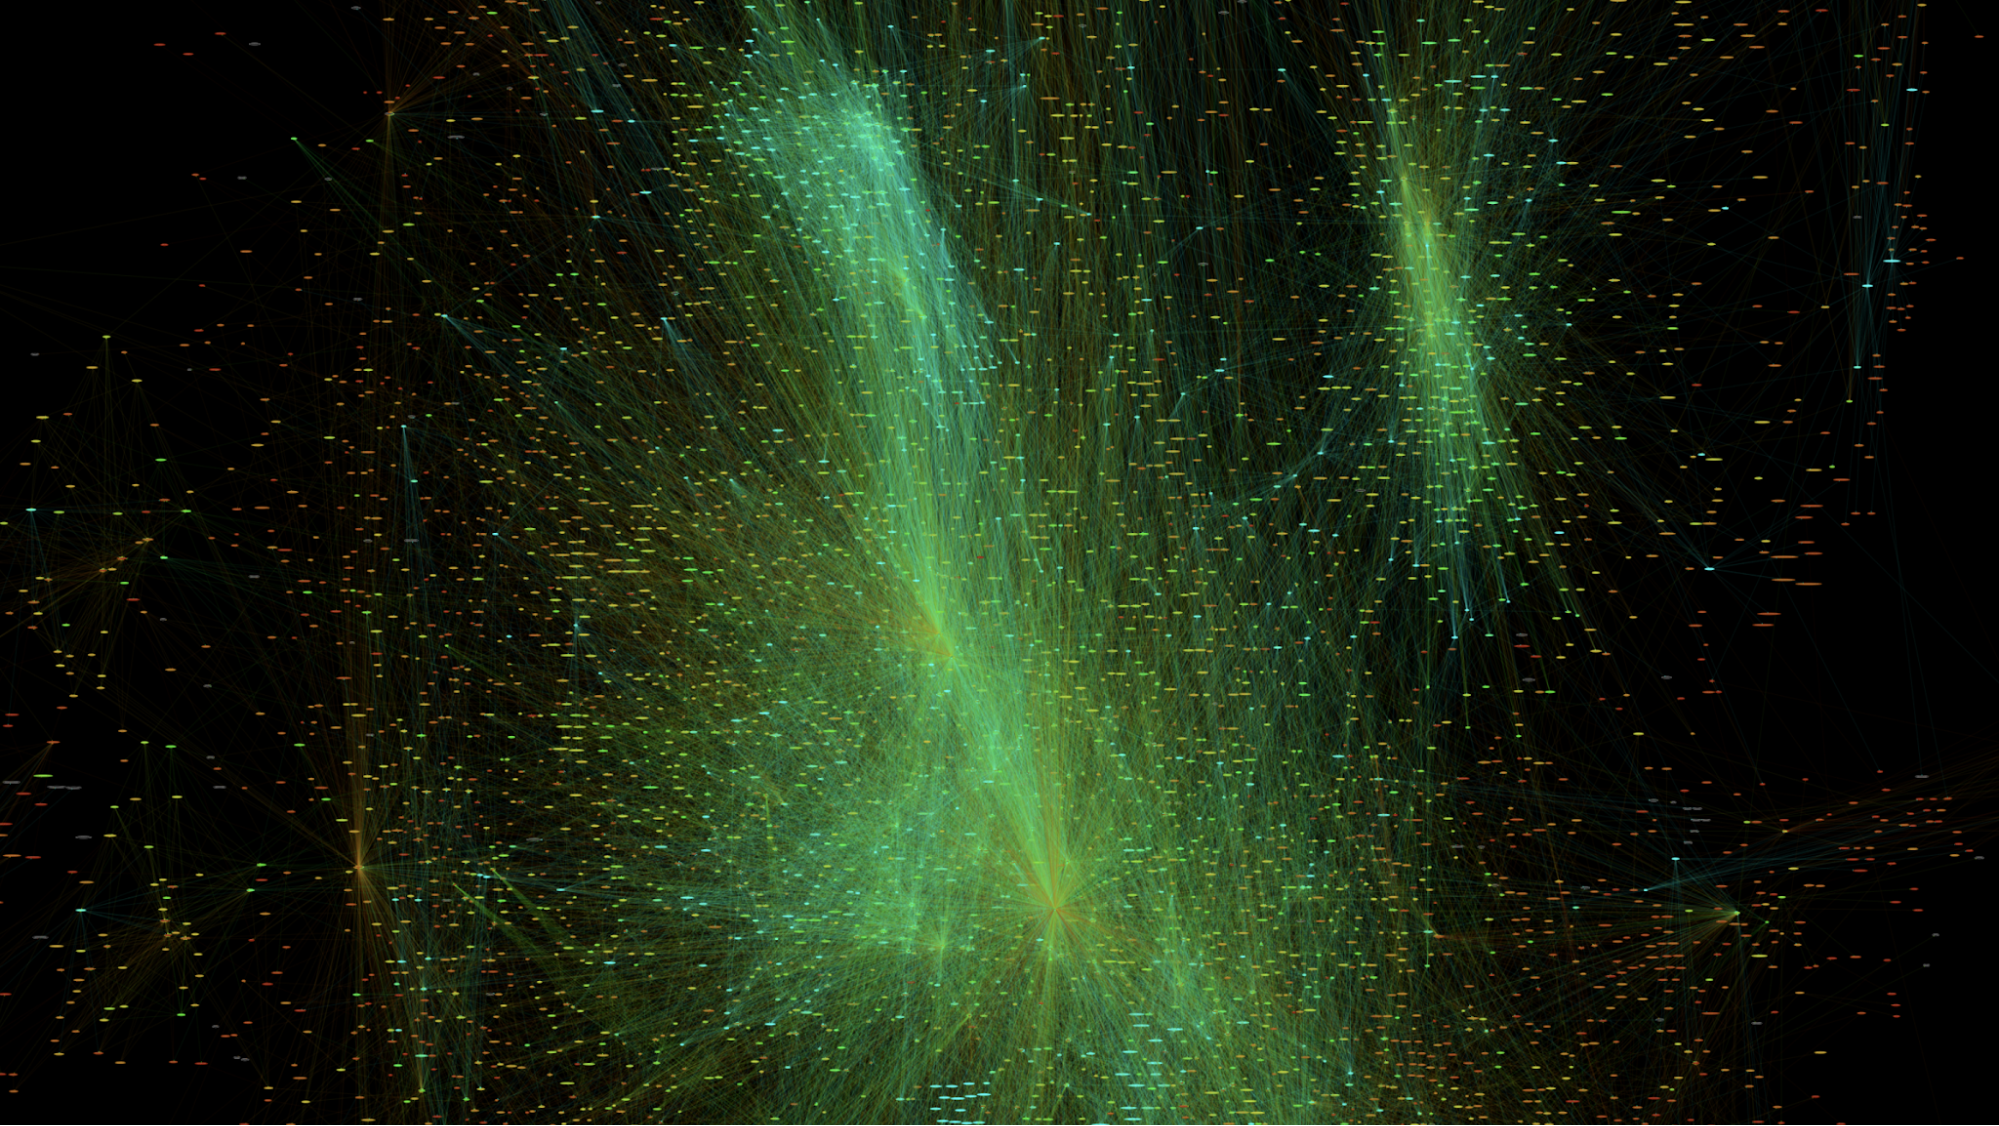 Graphic represents the relationships between all of the software repositories in Fedora Linux, many thousands of green dots cross-connected to appear like a cloud nebula.